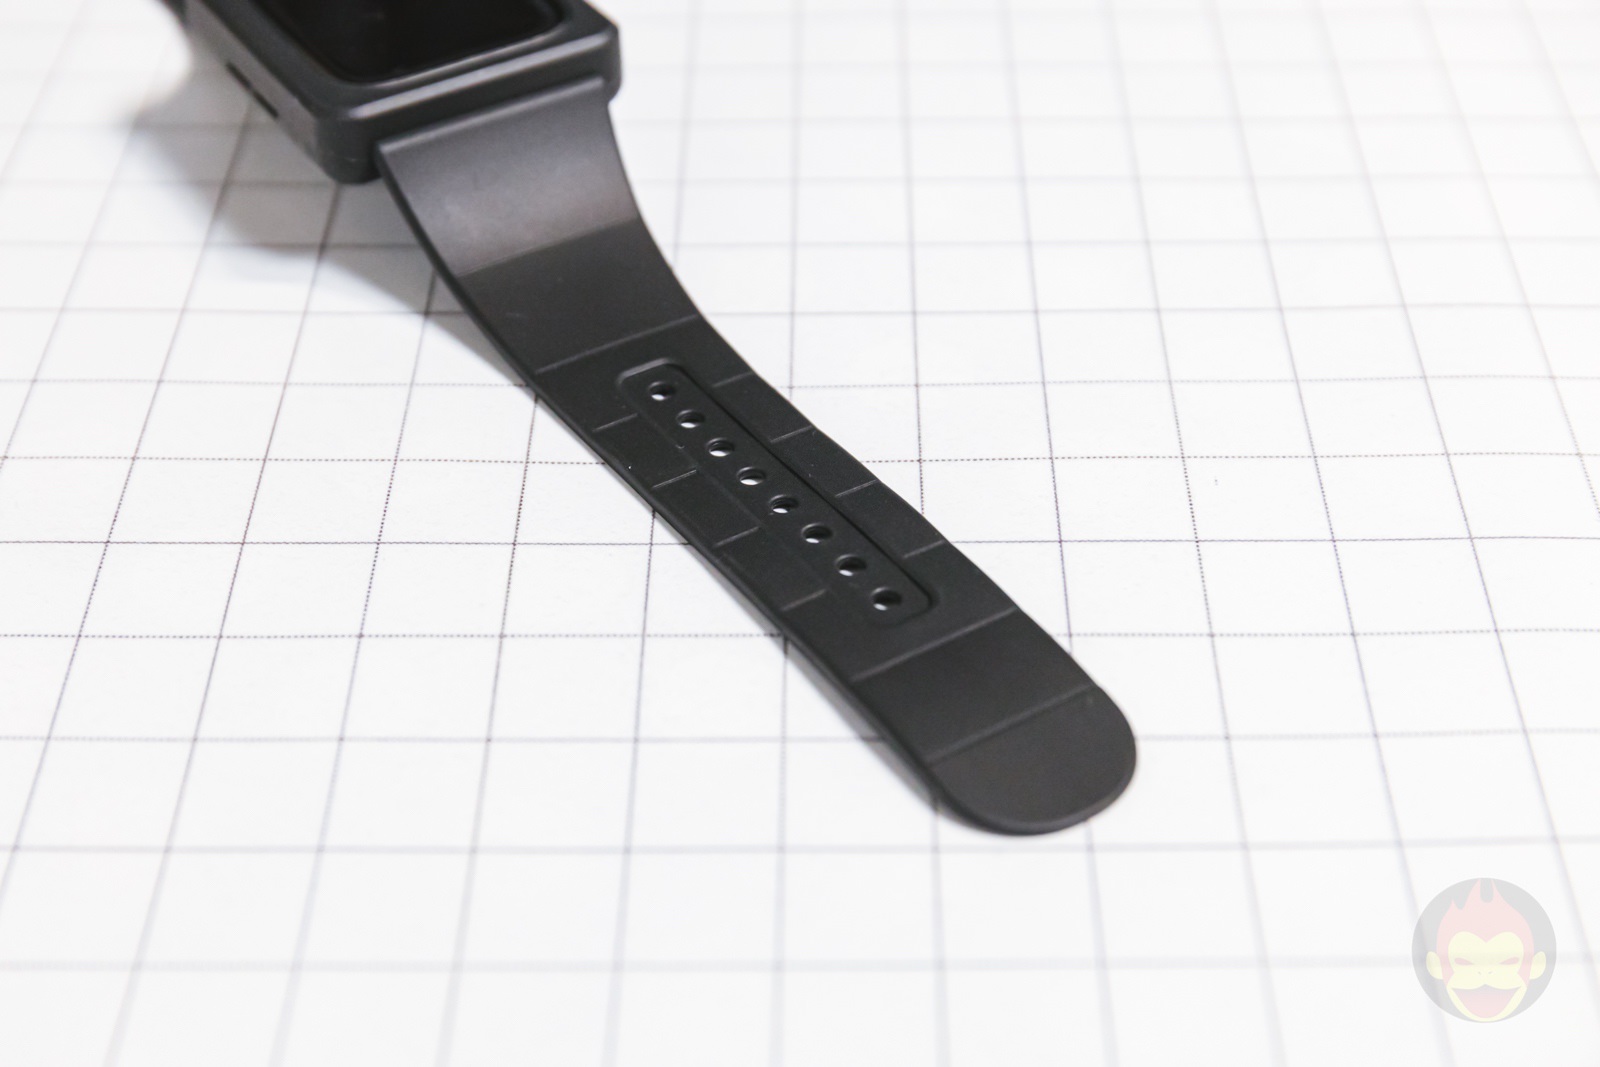 TILE AppleWatch Band Review 02